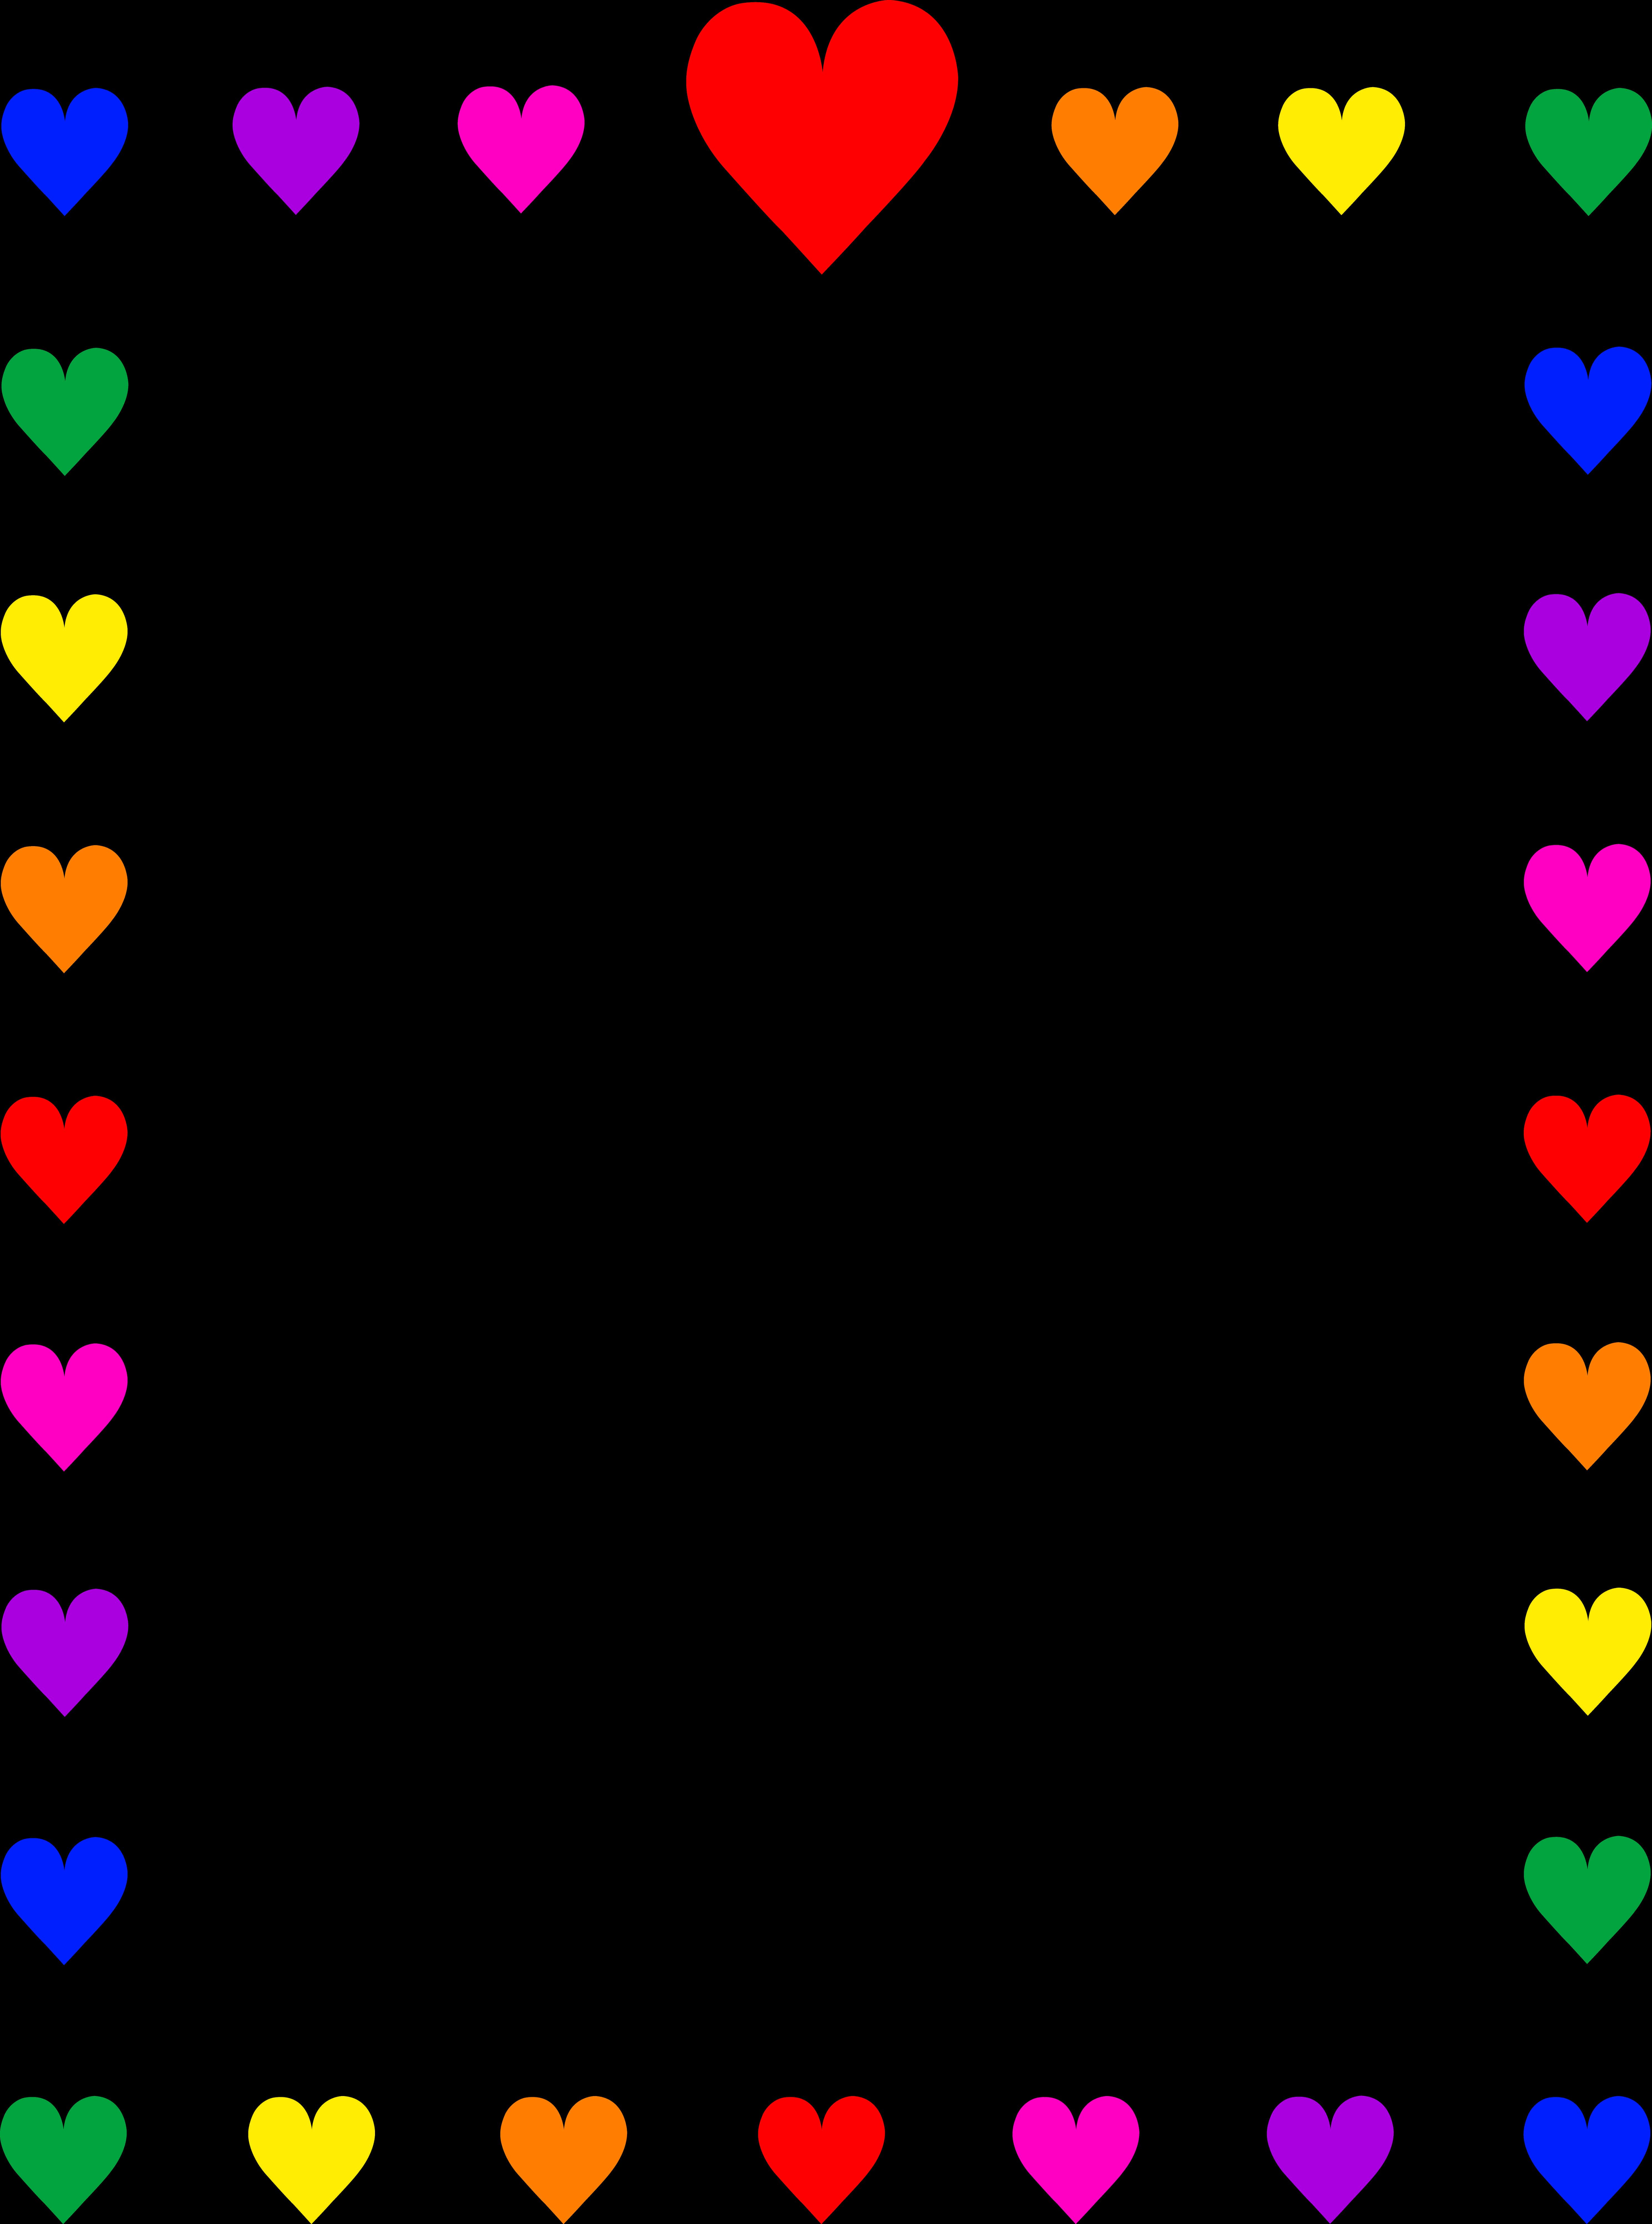 A Rainbow Colored Hearts On A Black Background